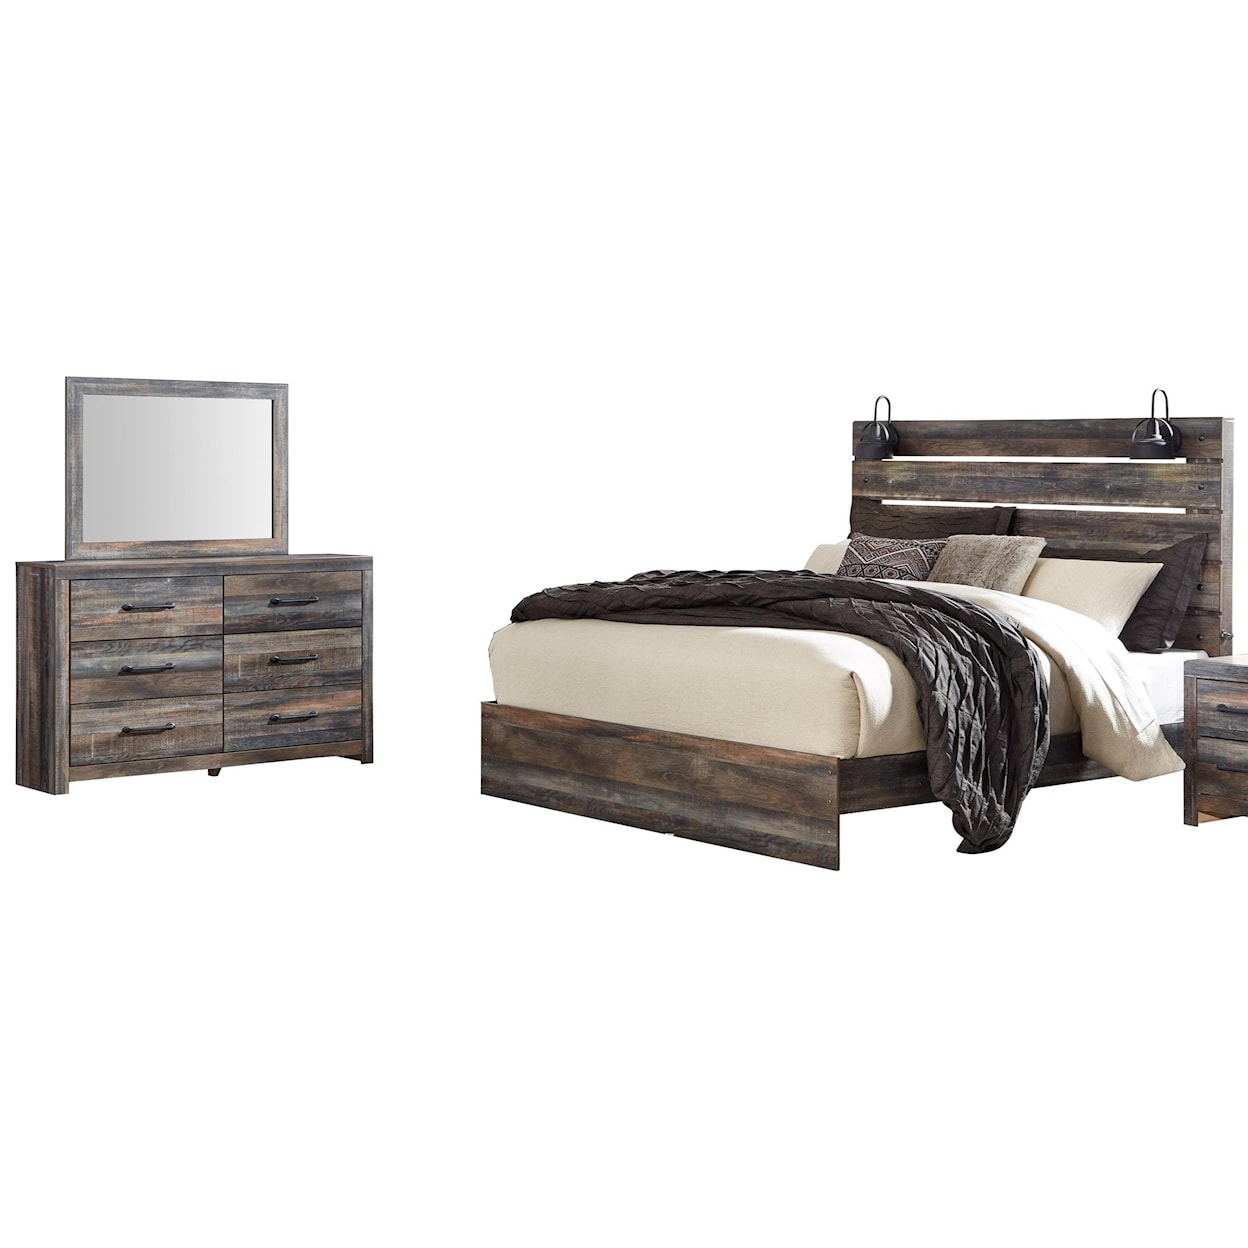 Signature Design by Ashley Drystan 5PC King Bedroom Group